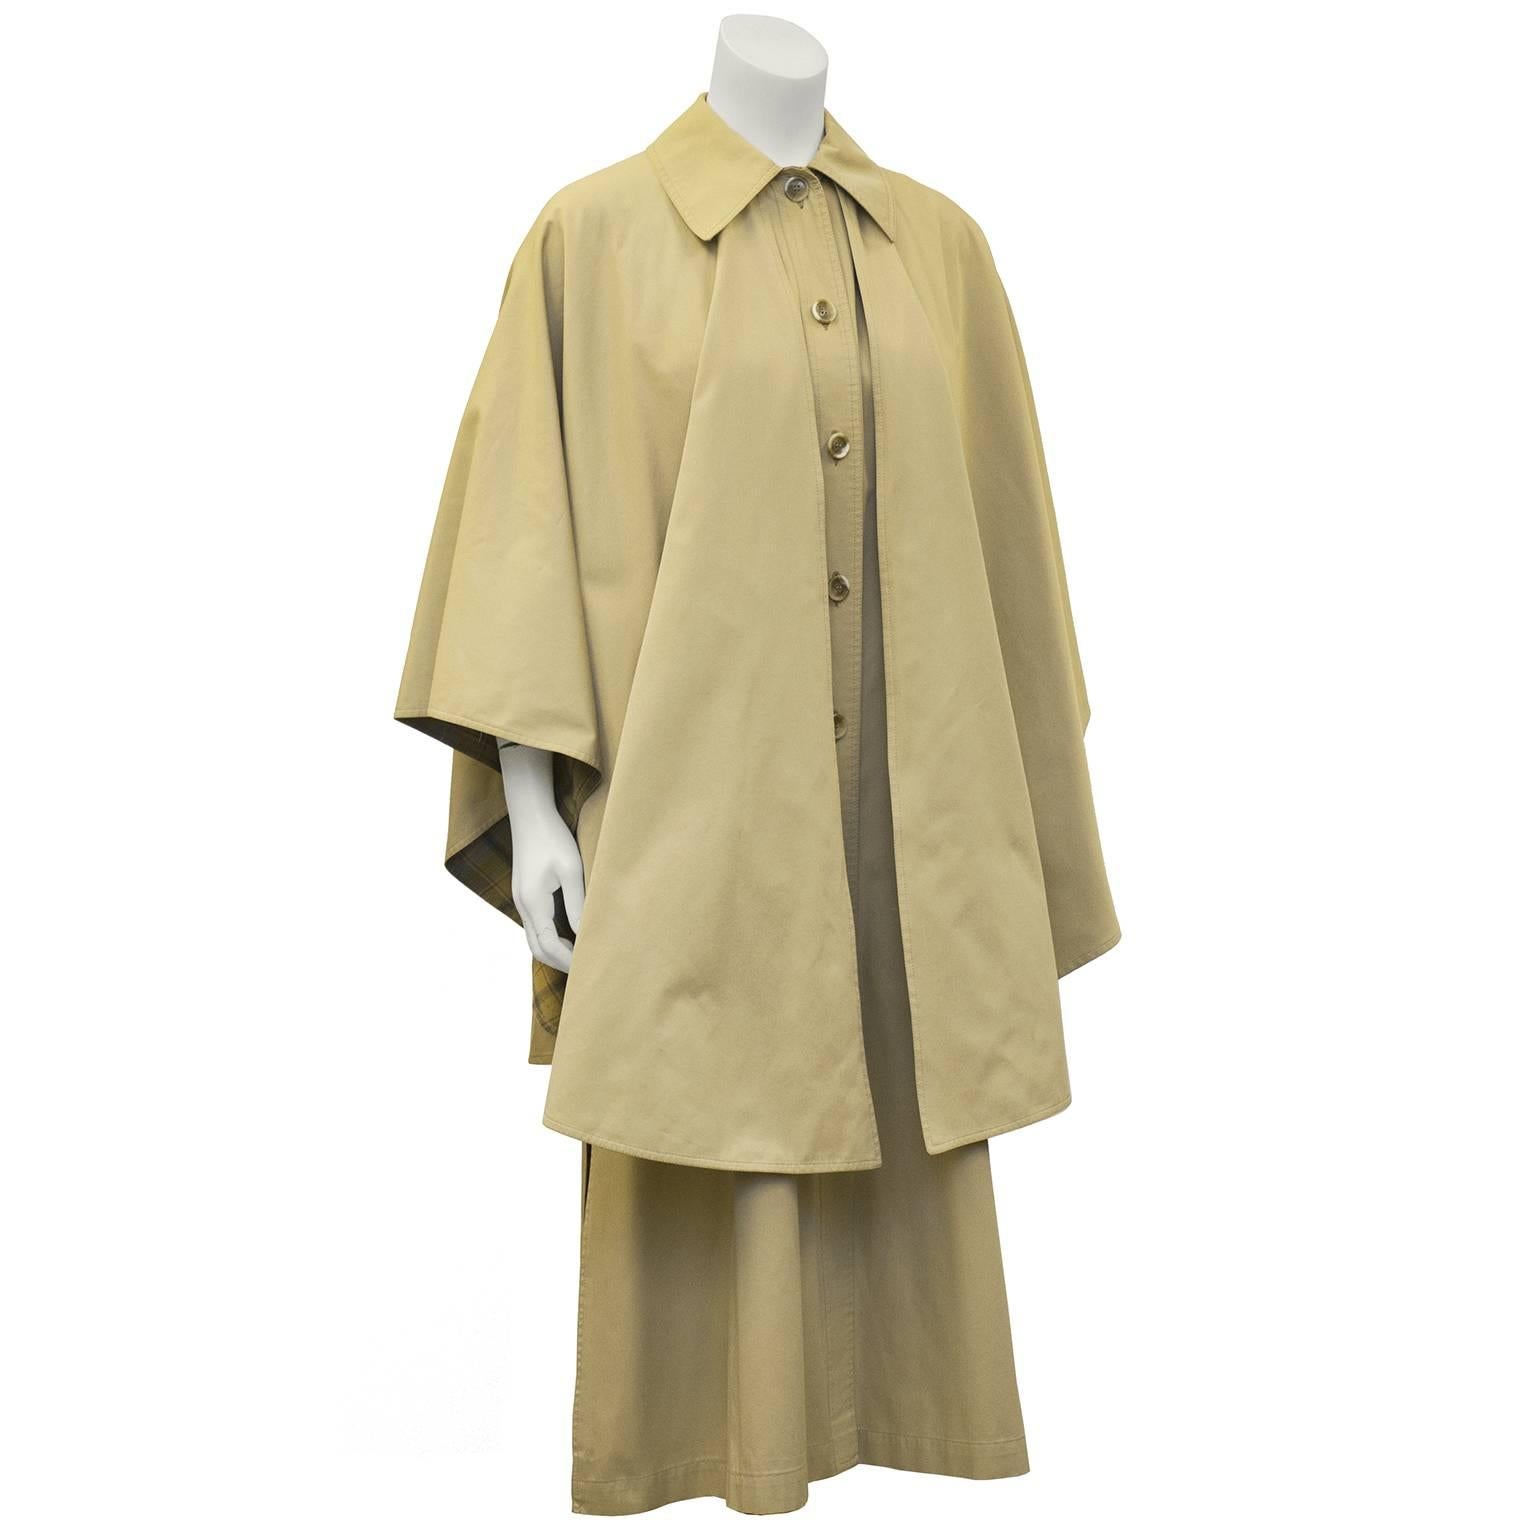 1970's Yves Saint Laurent khaki cotton poplin all weather cape lined in plaid light weight fabric. The cape silhouette was brought back into mainstream fashion in the 1970's as Yves Saint Laurent explored styles that had grace and versatility for